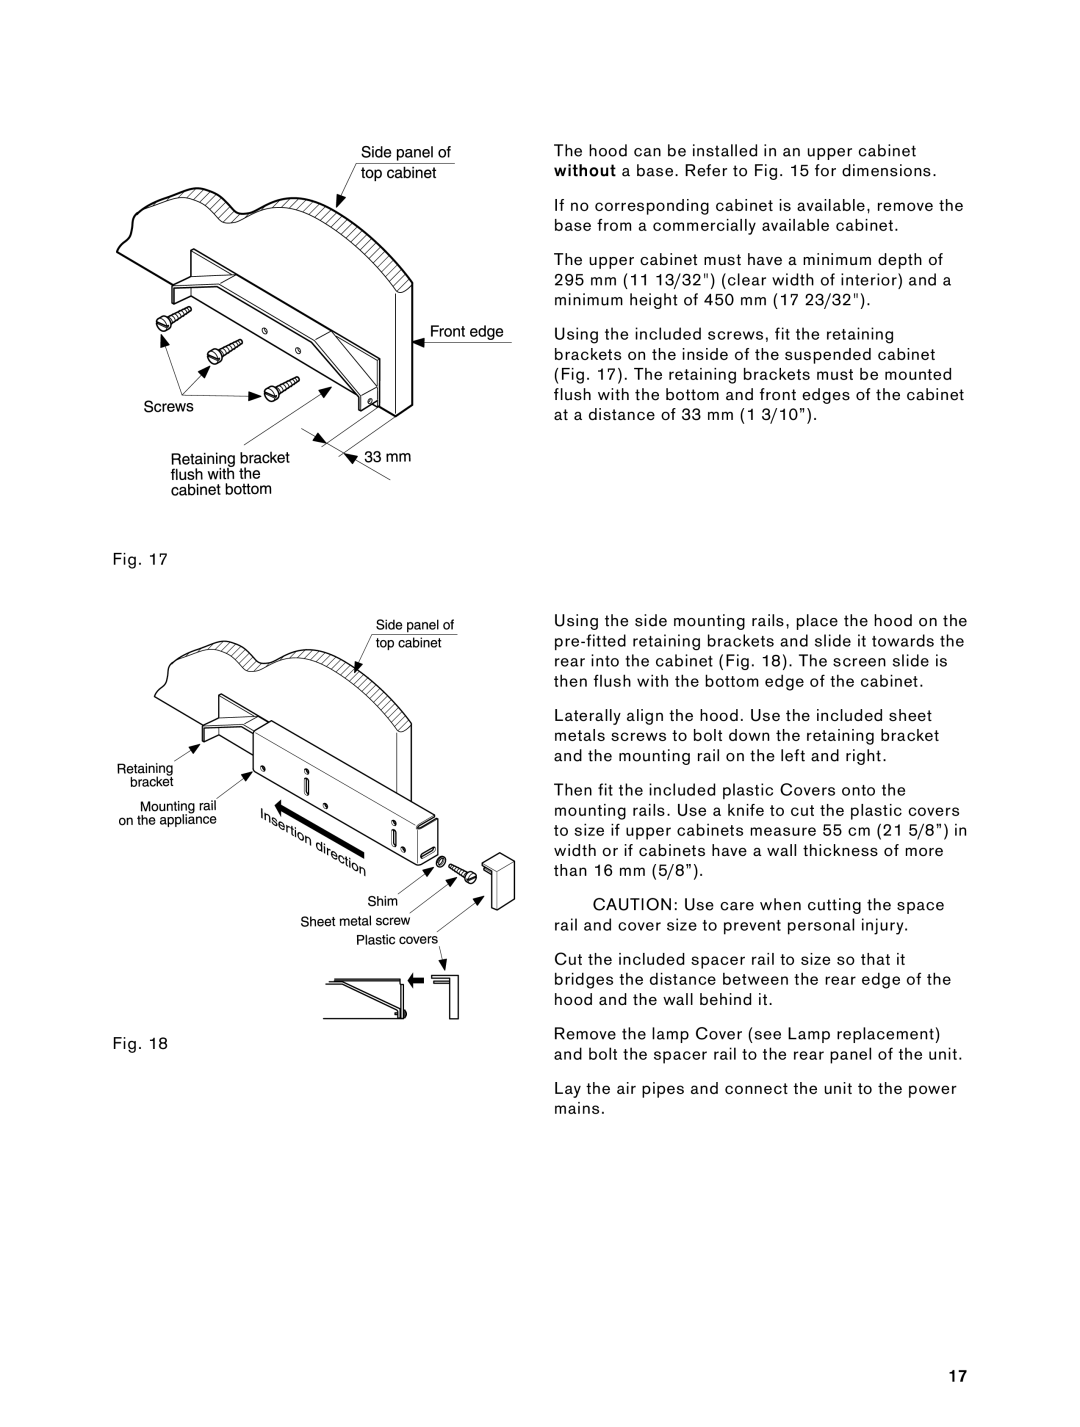 Gaggenau 900791 installation instructions Lay the air pipes and connect the unit to the power mains 